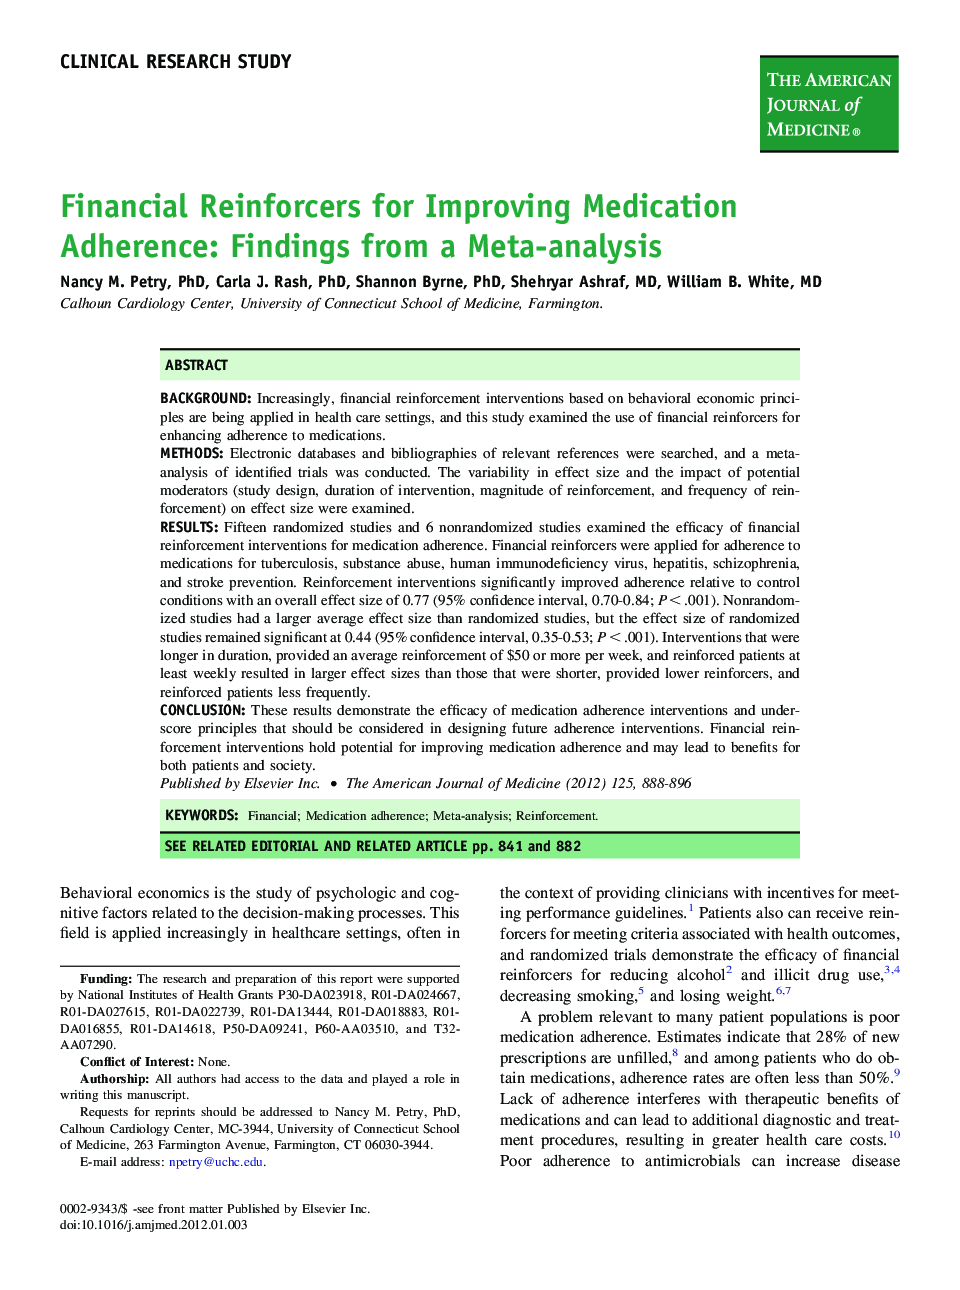 Clinical research studyFinancial Reinforcers for Improving Medication Adherence: Findings from a Meta-analysis